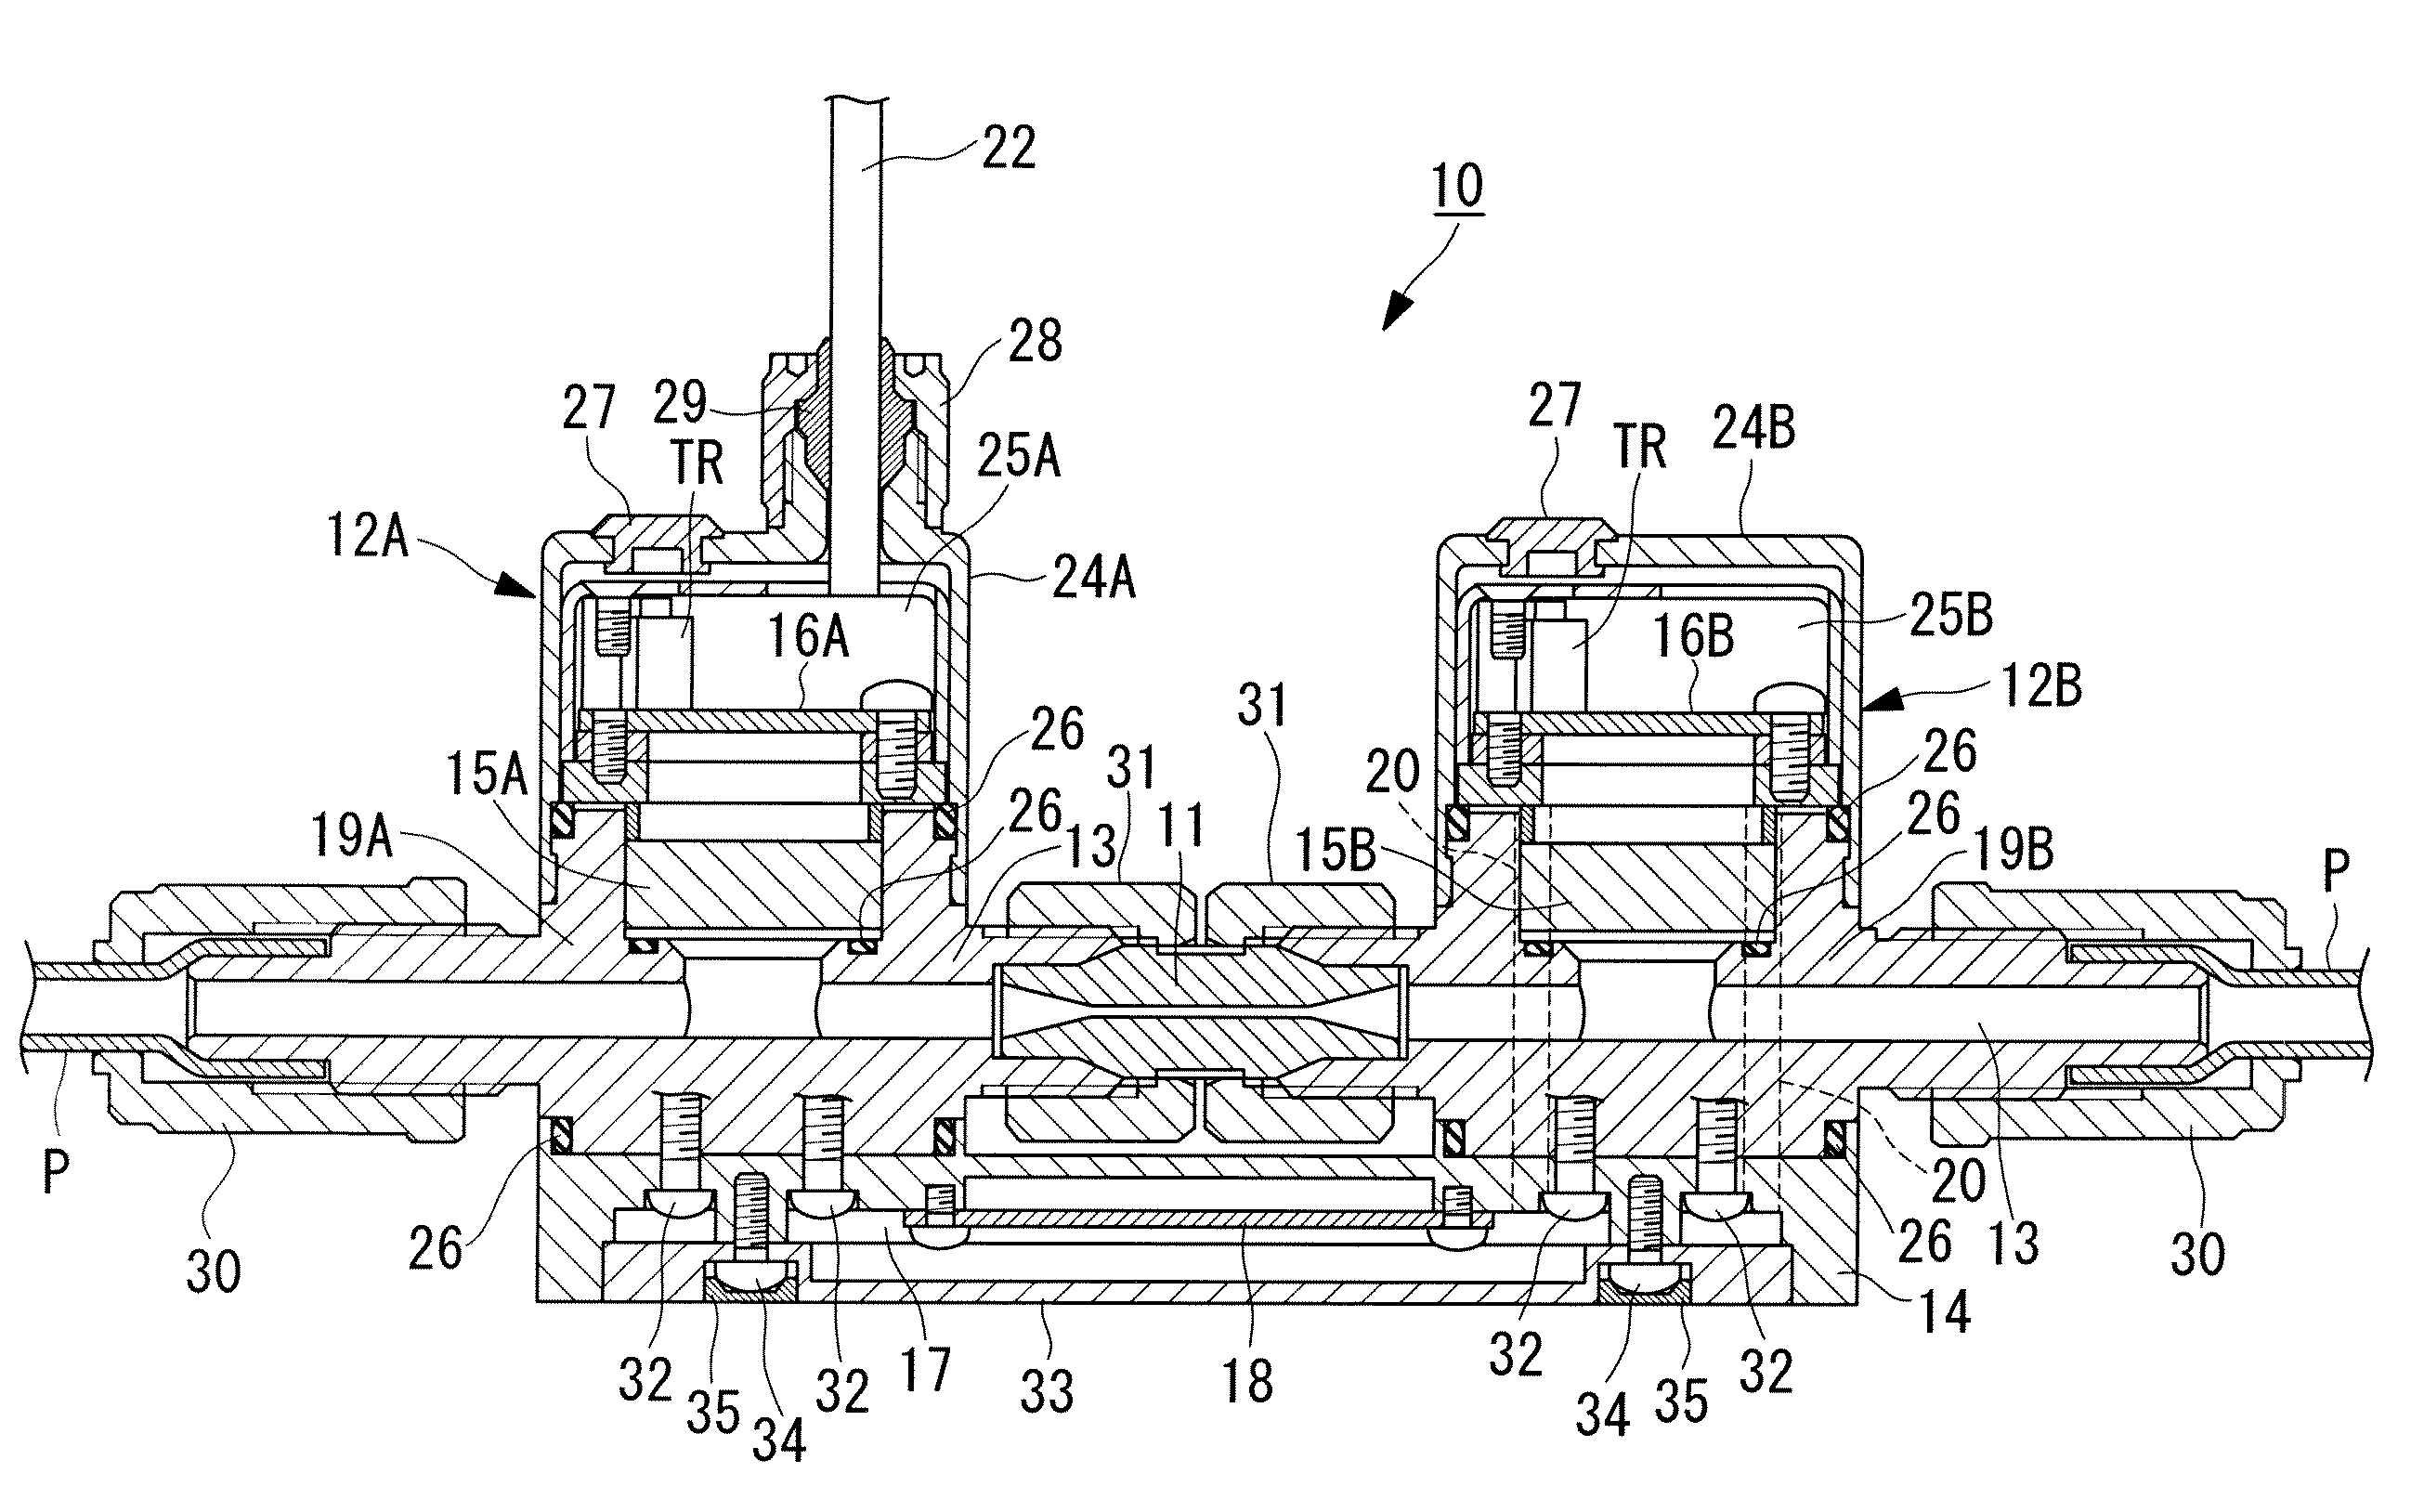 Differential-pressure flow meter having a main control board in a space in a base member